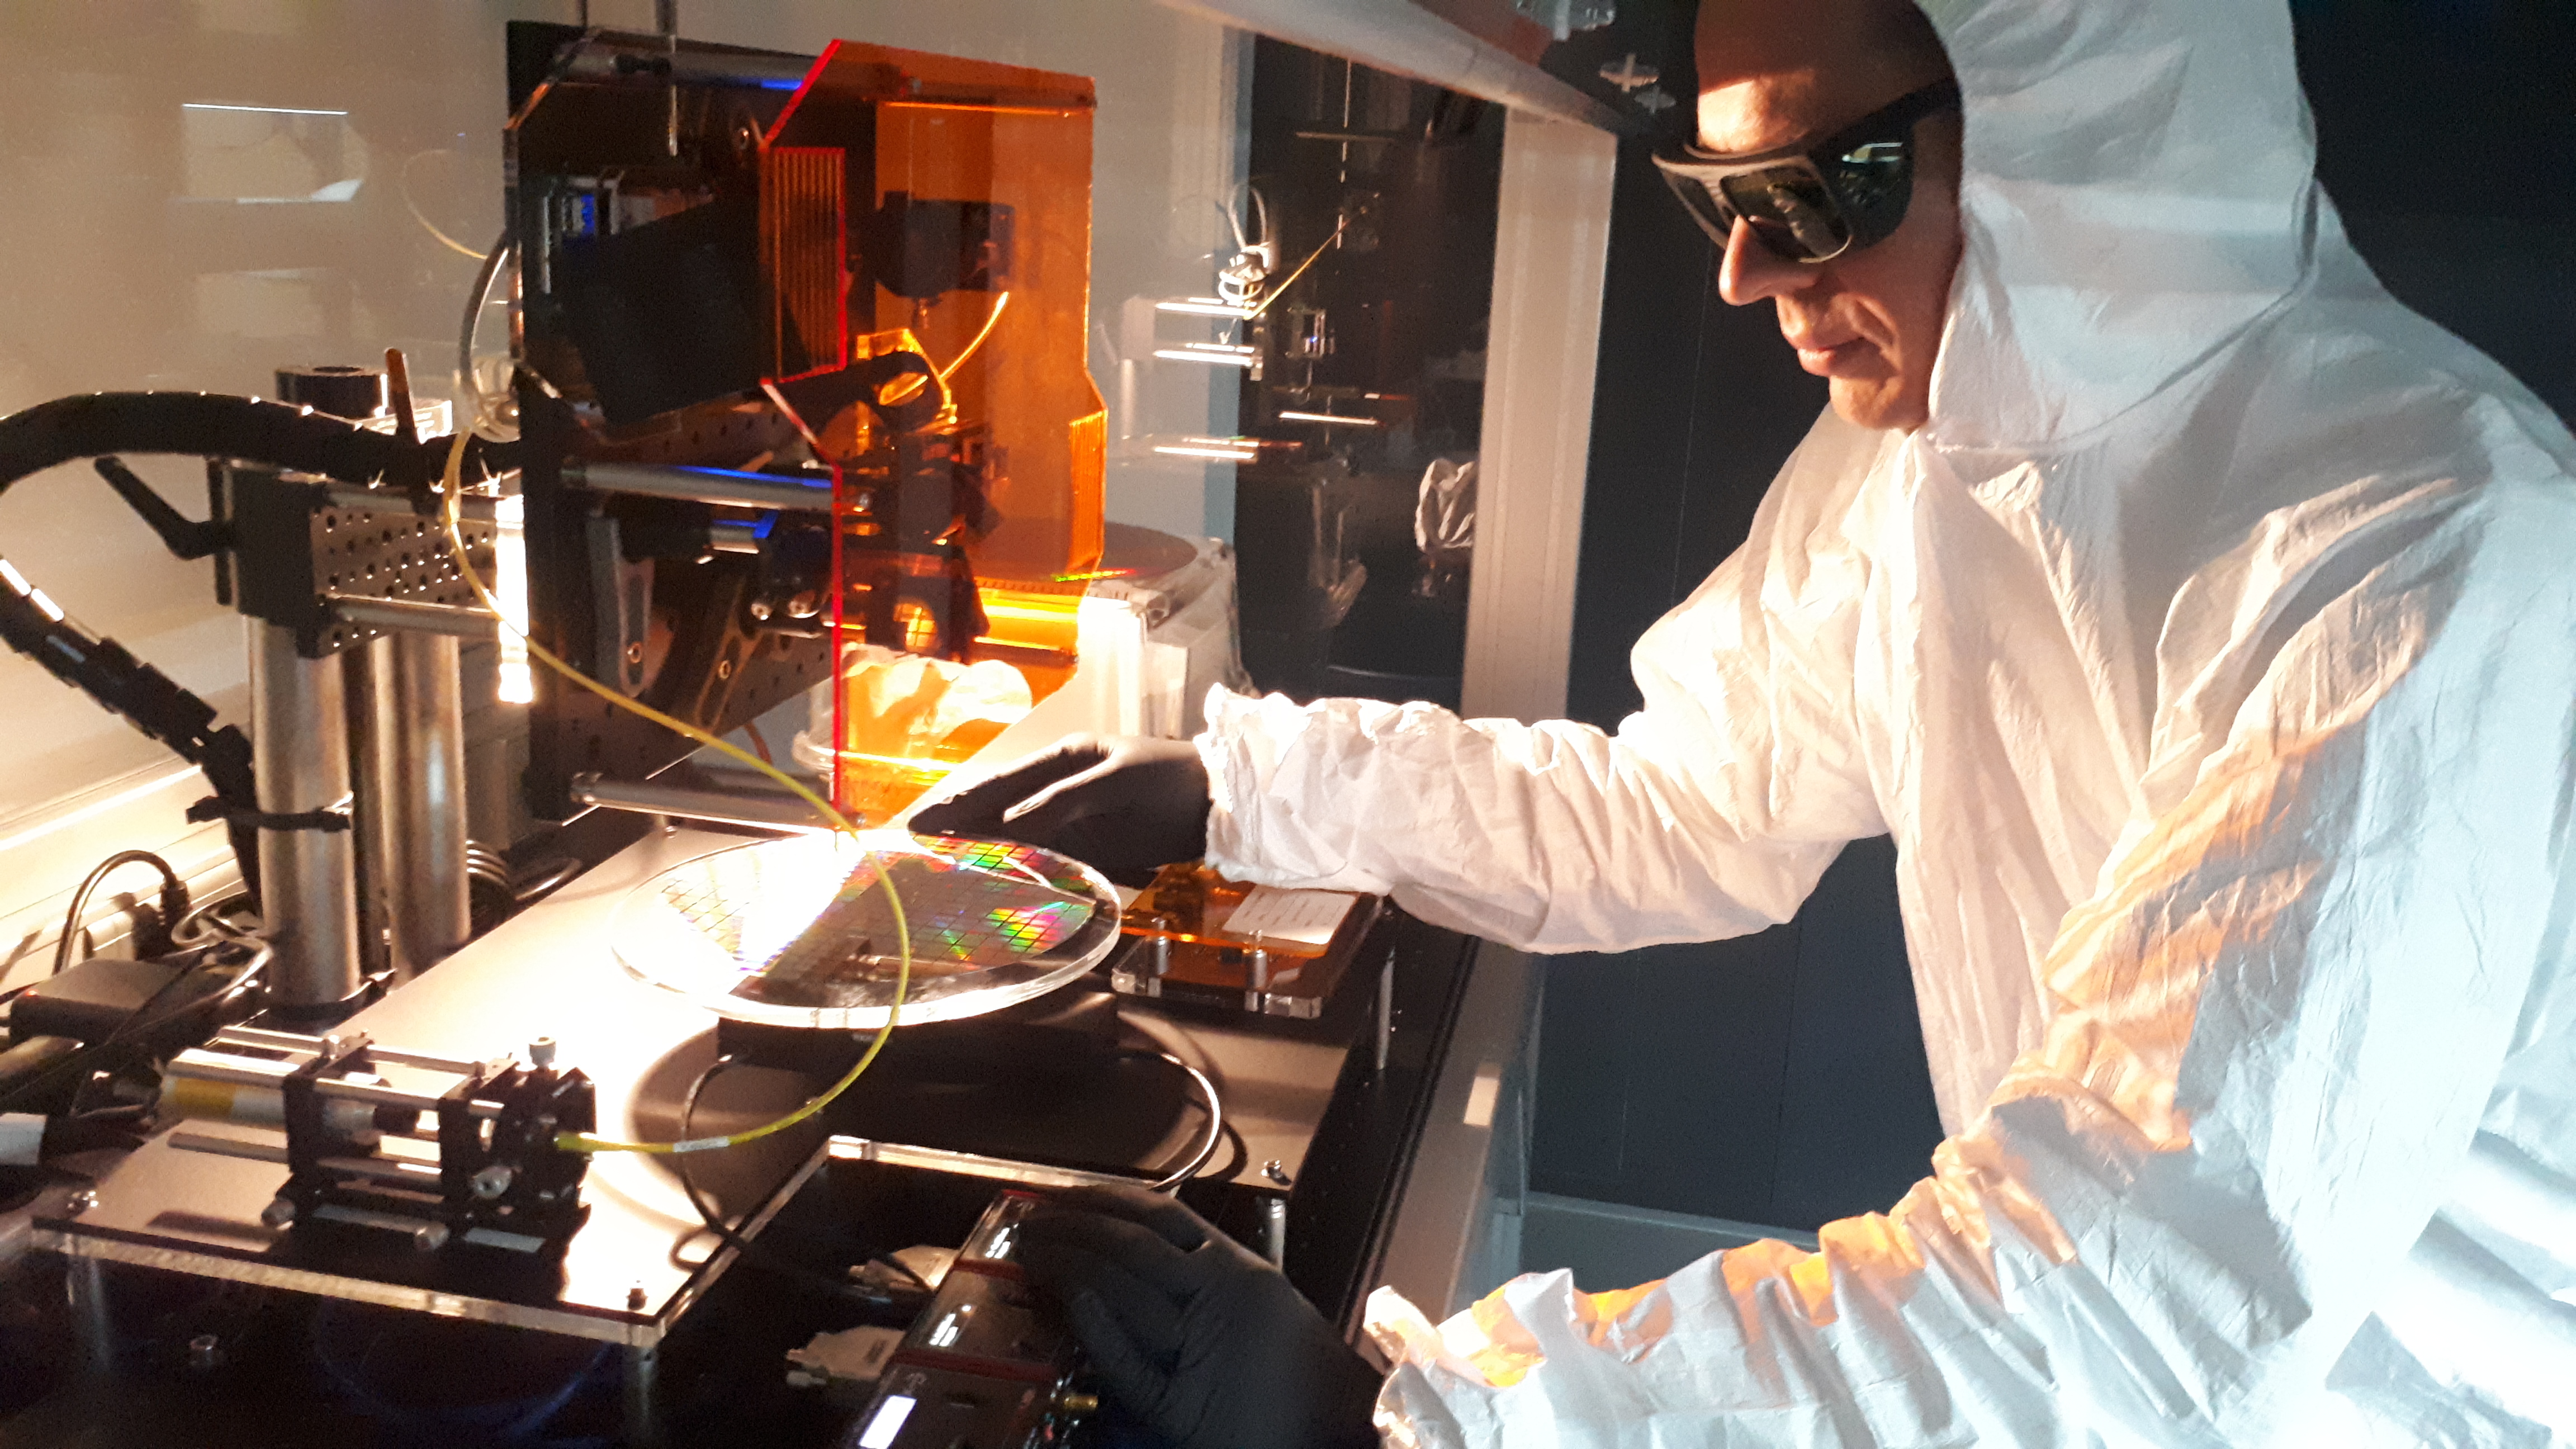 Scientist Christopher Taudt works on a setup for optical wafer analysis in the Fraunhofer AZOM's cleanroom section. New methods in the fabrication process will increase the quality of these wafers and improve the reliability of electronic components.